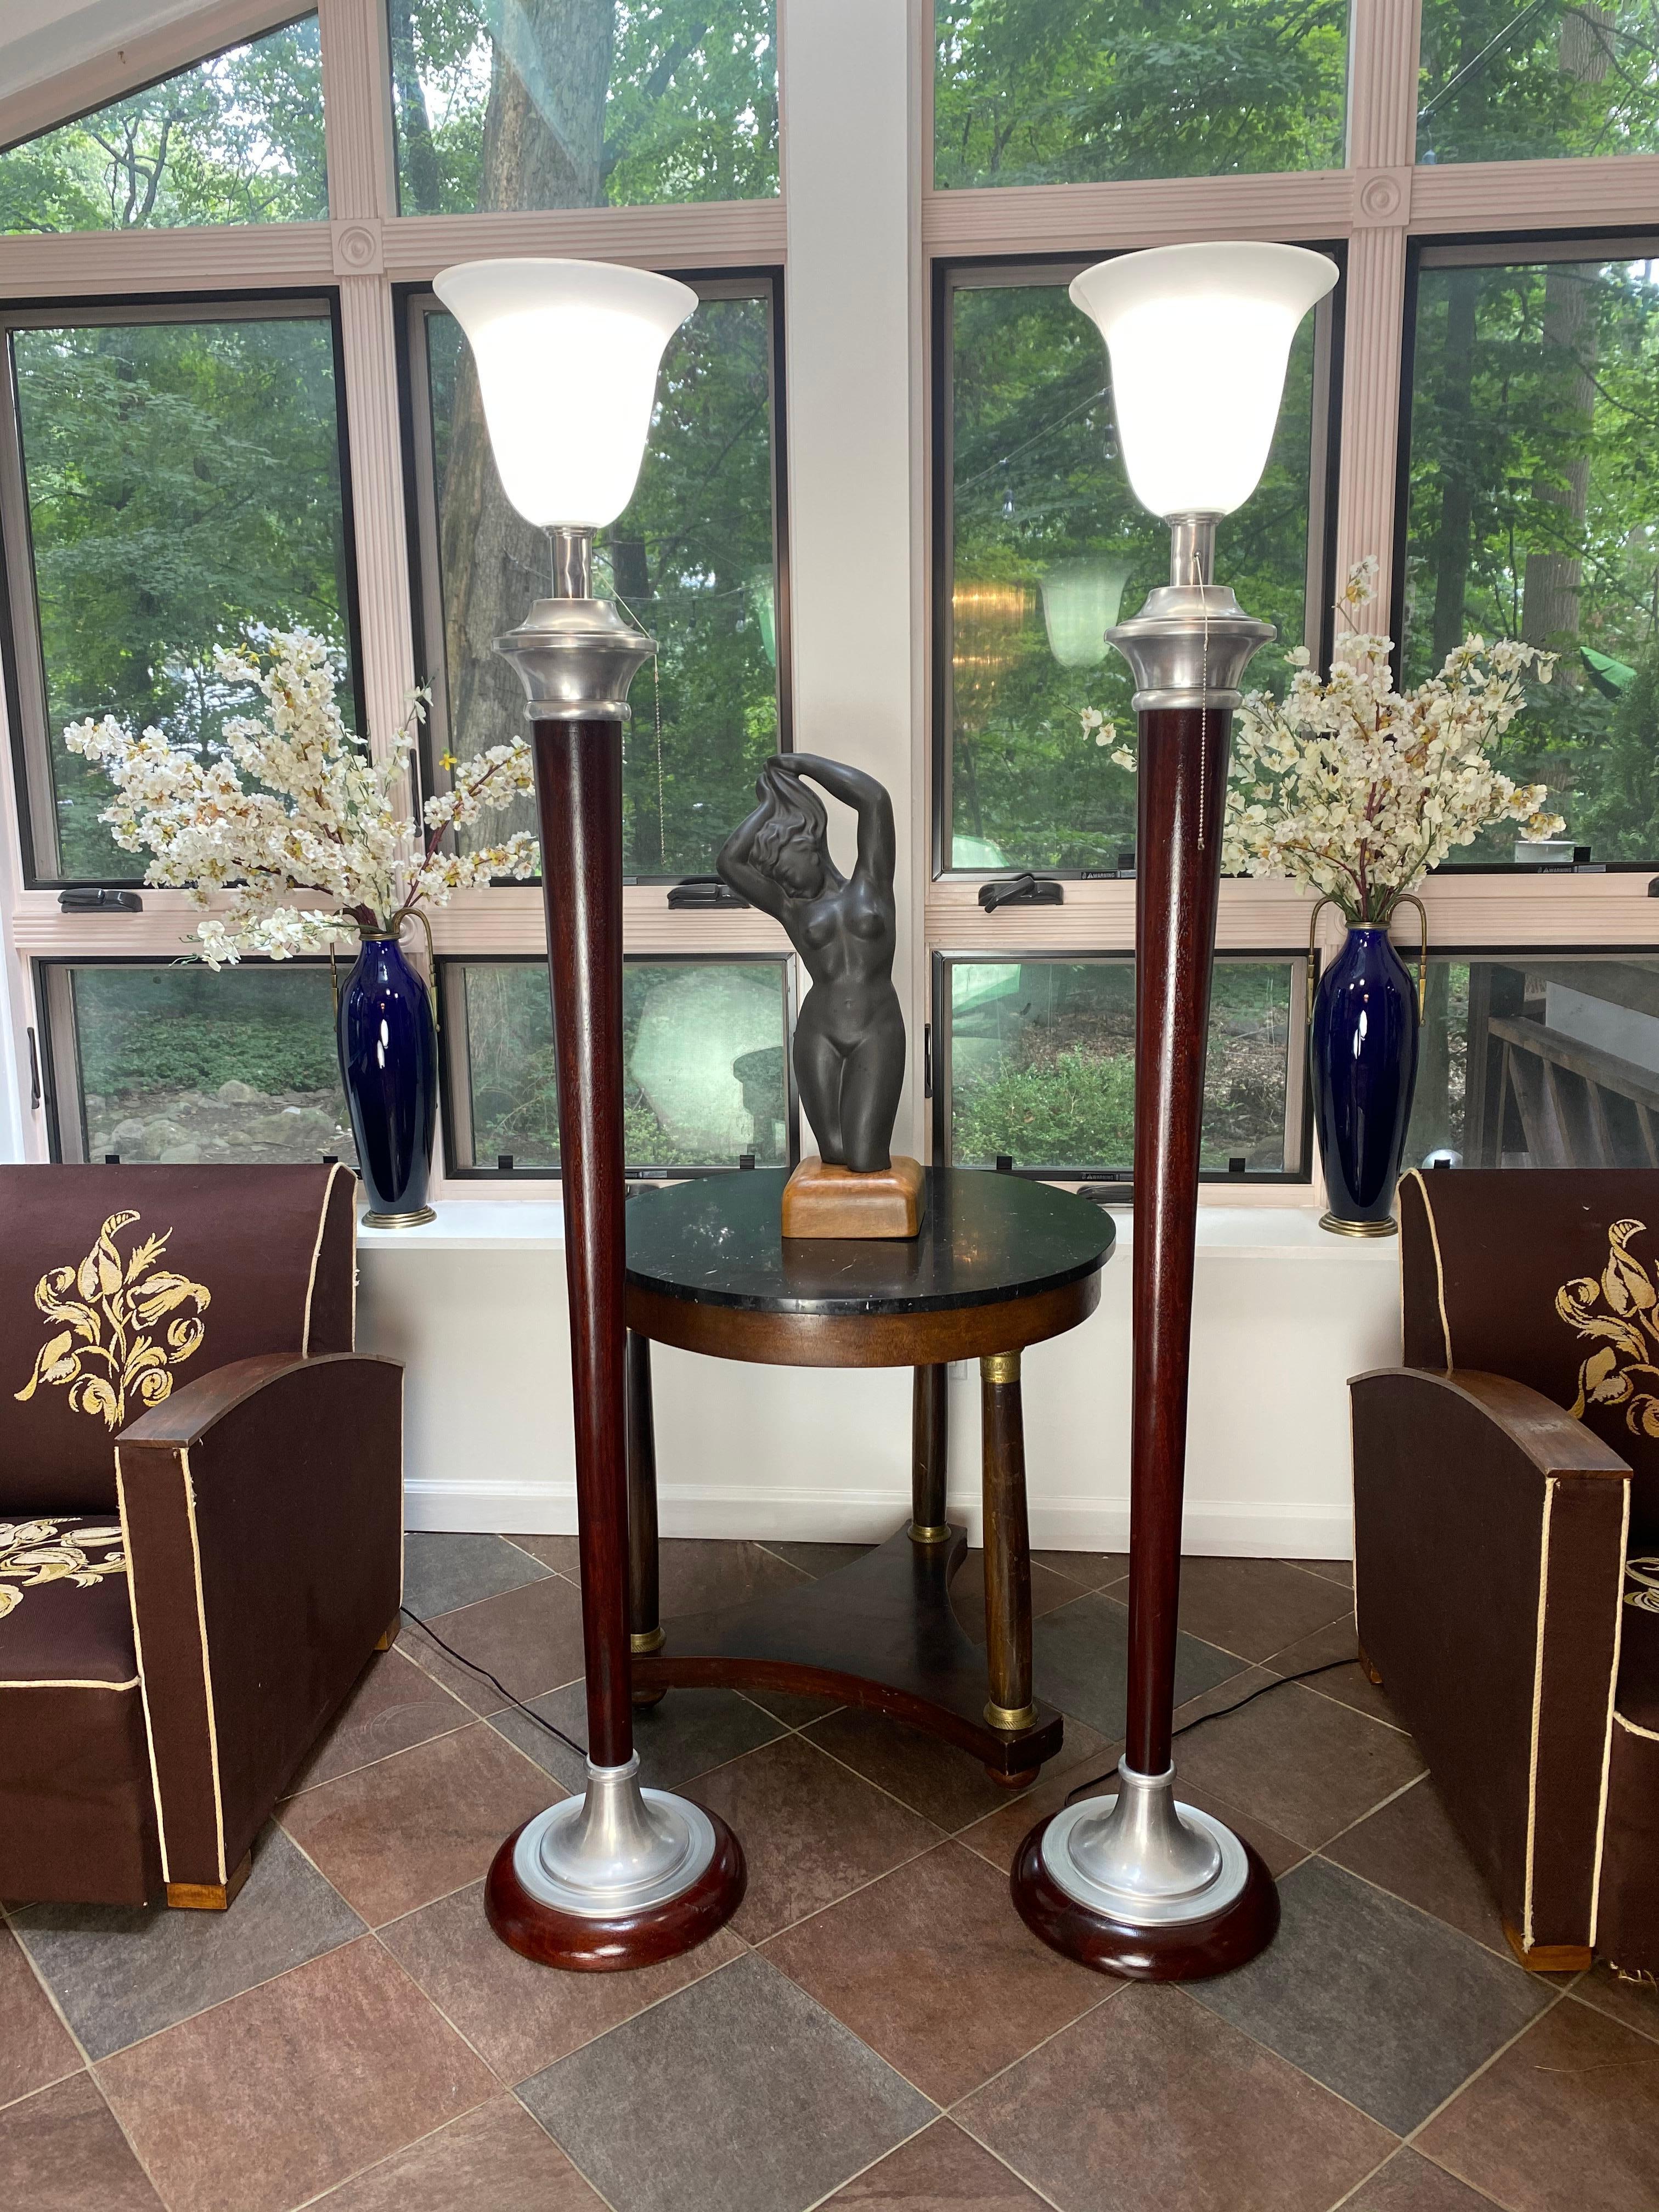 Pair of rare 1930s Art Deco Mazda floor lamps with original Mazda Lamps Factory stamp. Made in France. They feature an opaque (Opaline) glass shade with chrome detailing and restored mahogany wood. All in impeccable conditions.
Provenance: L’hôtel